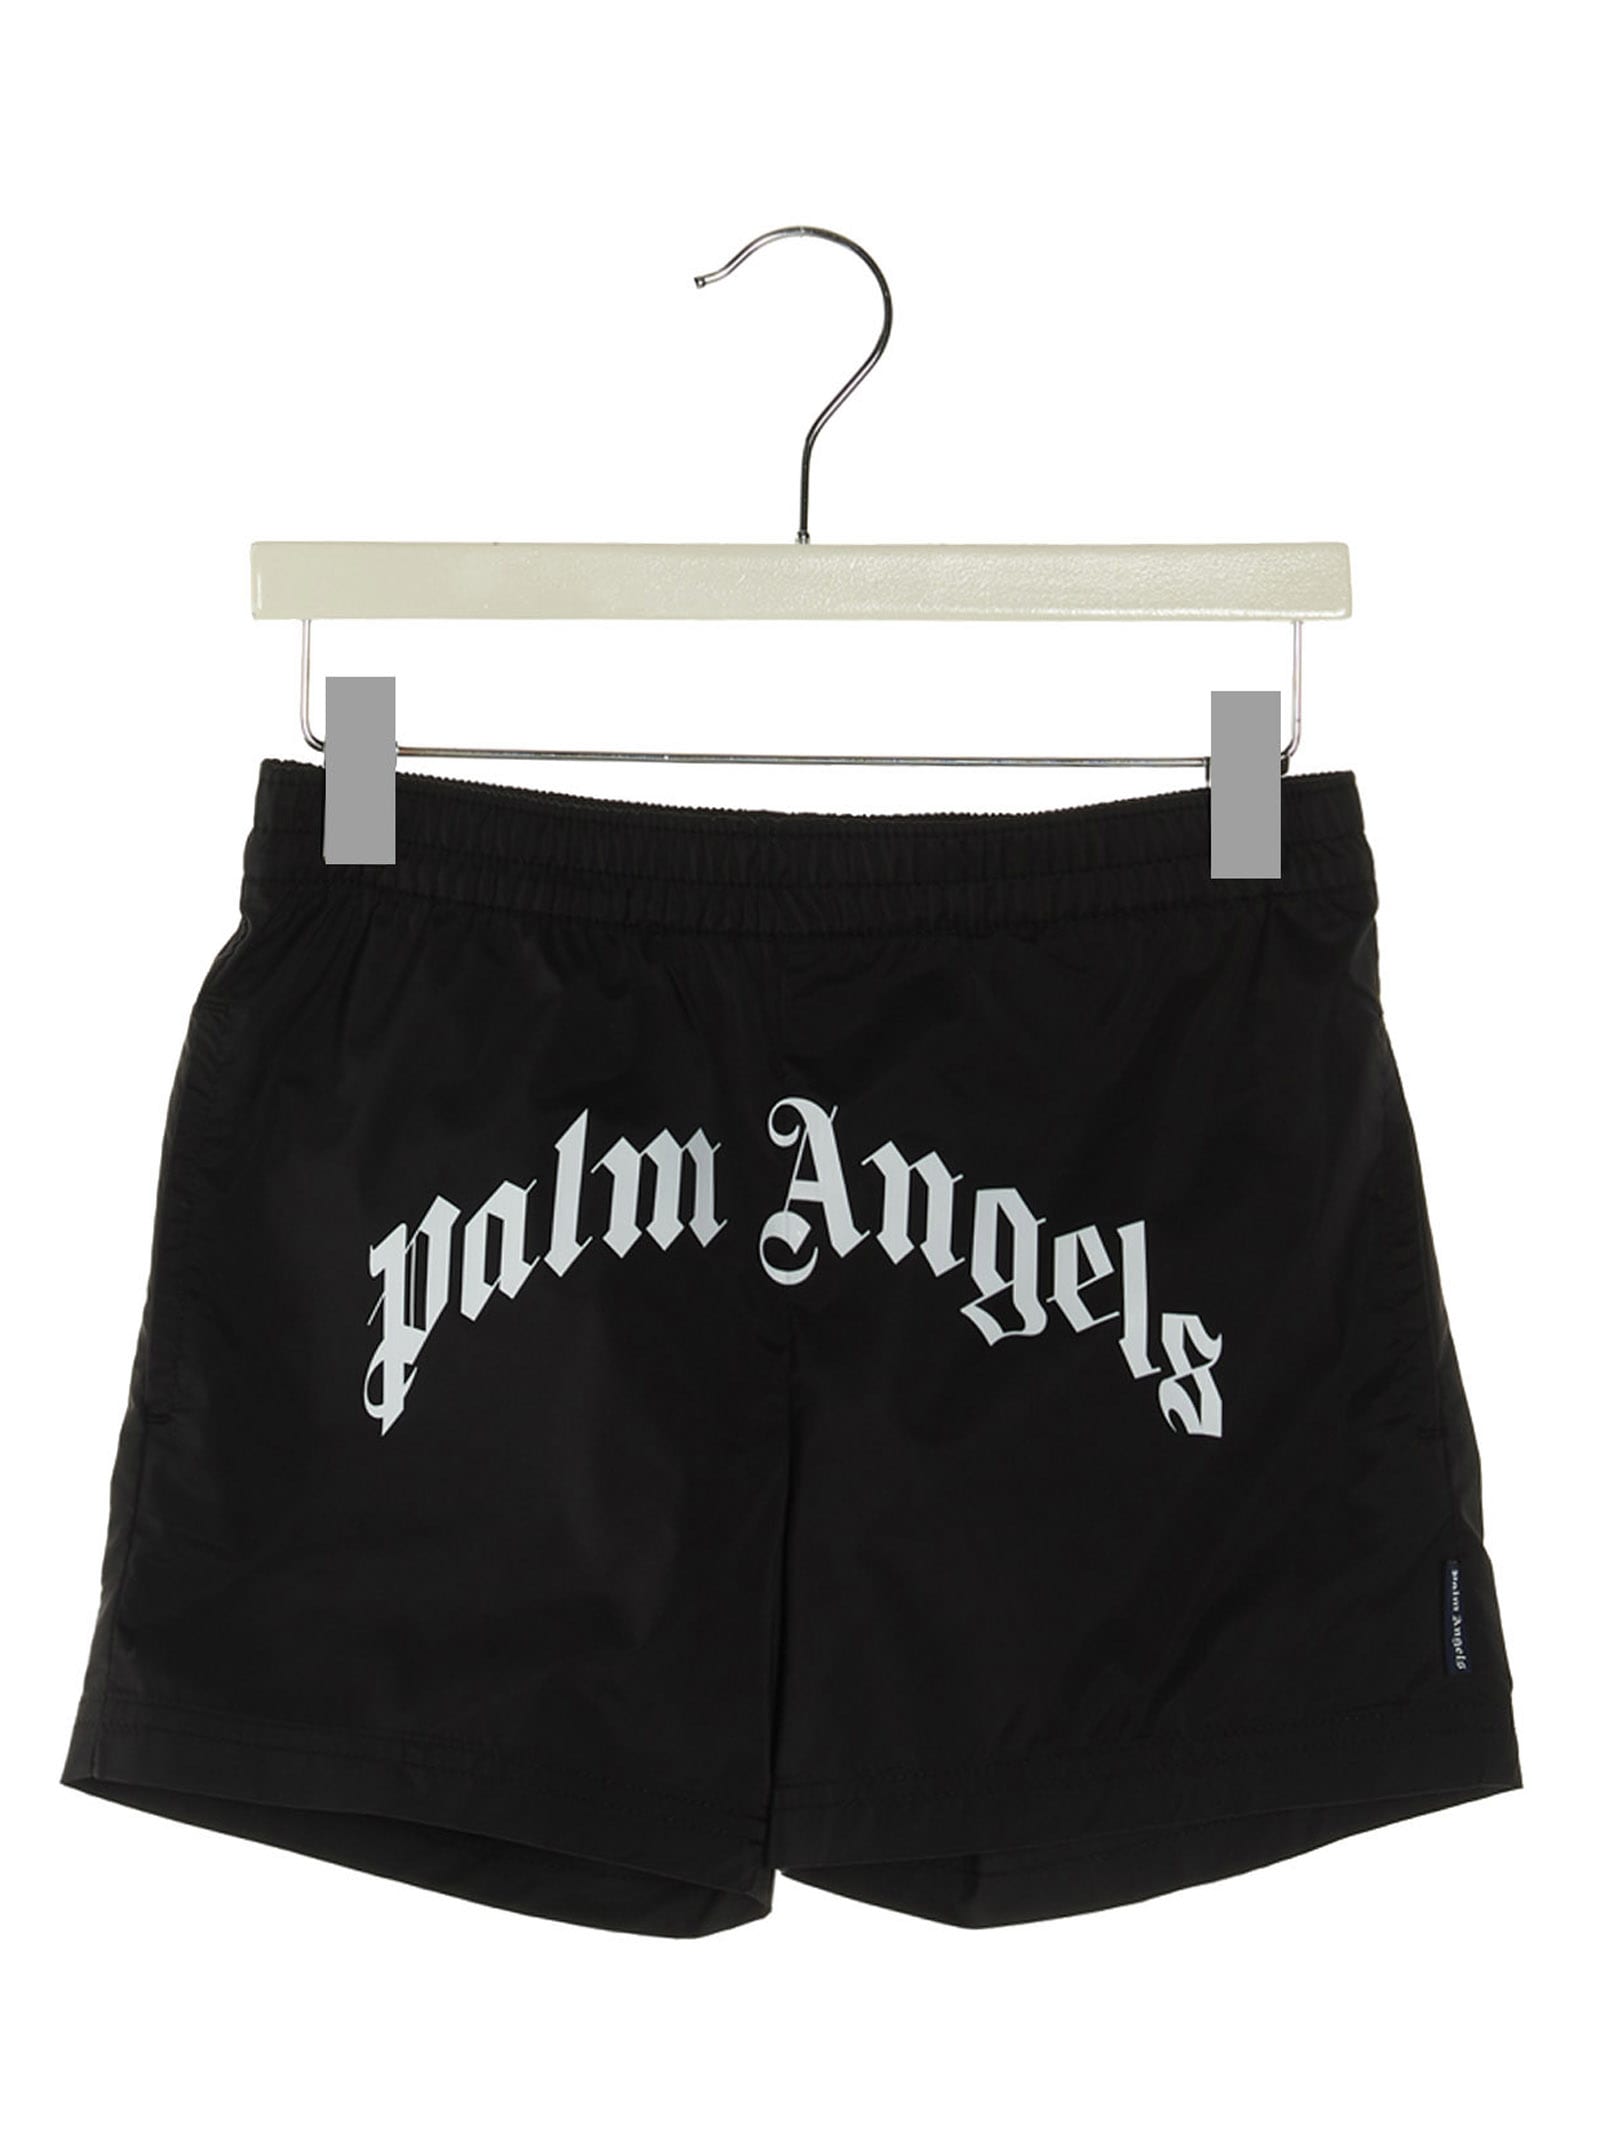 Palm Angels curved Logo Swimming Trunks